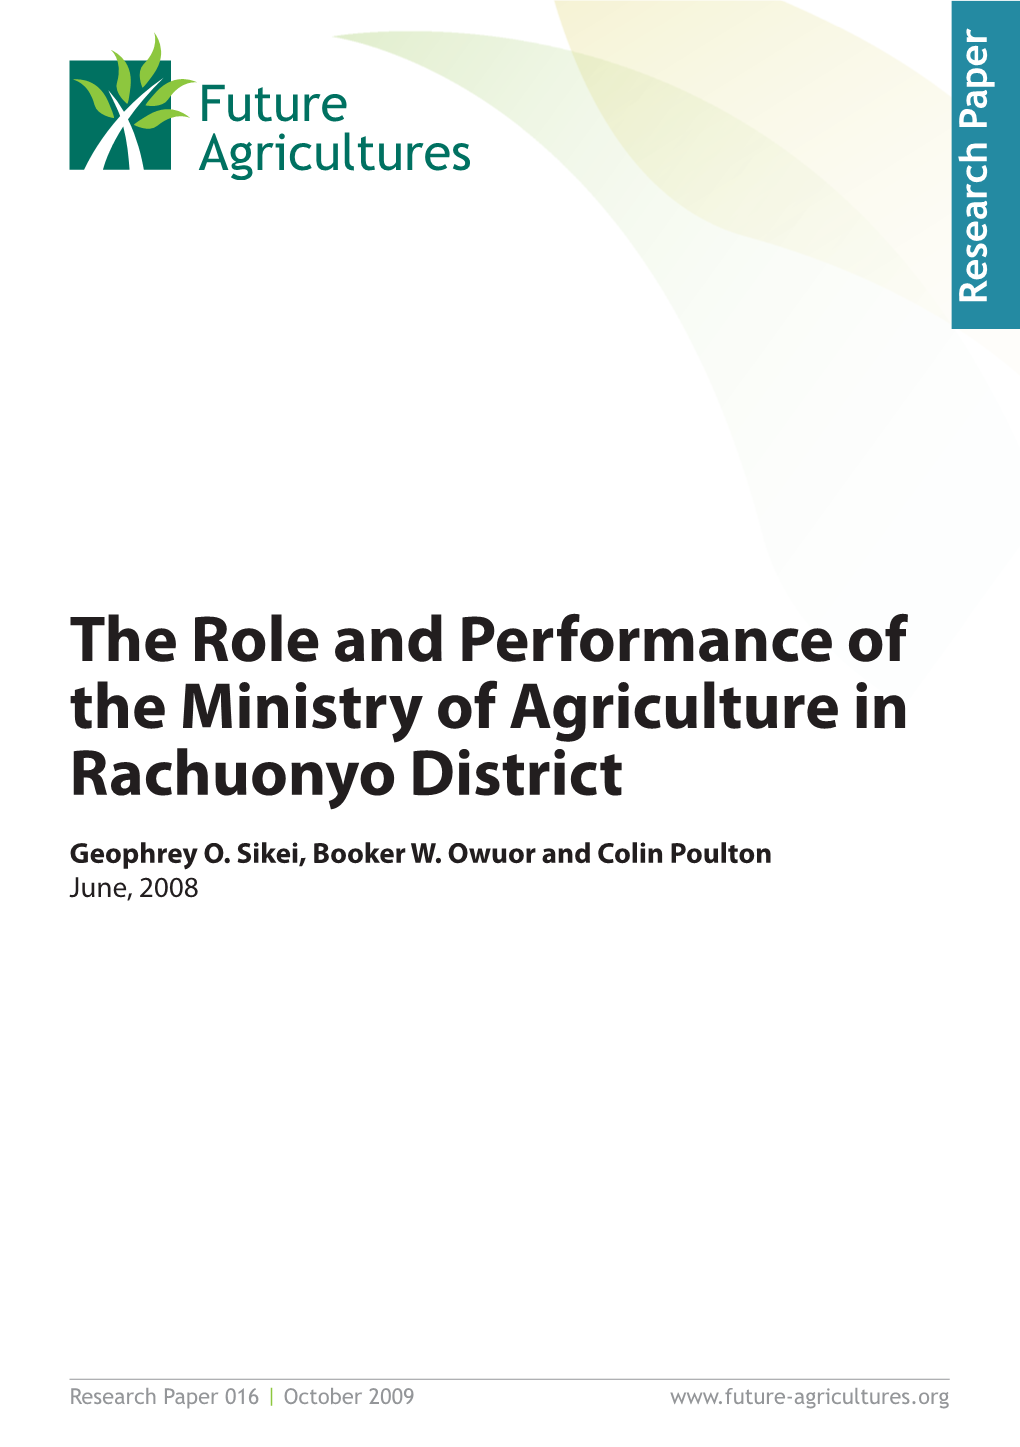 The Role and Performance of the Ministry of Agriculture in Rachuonyo District